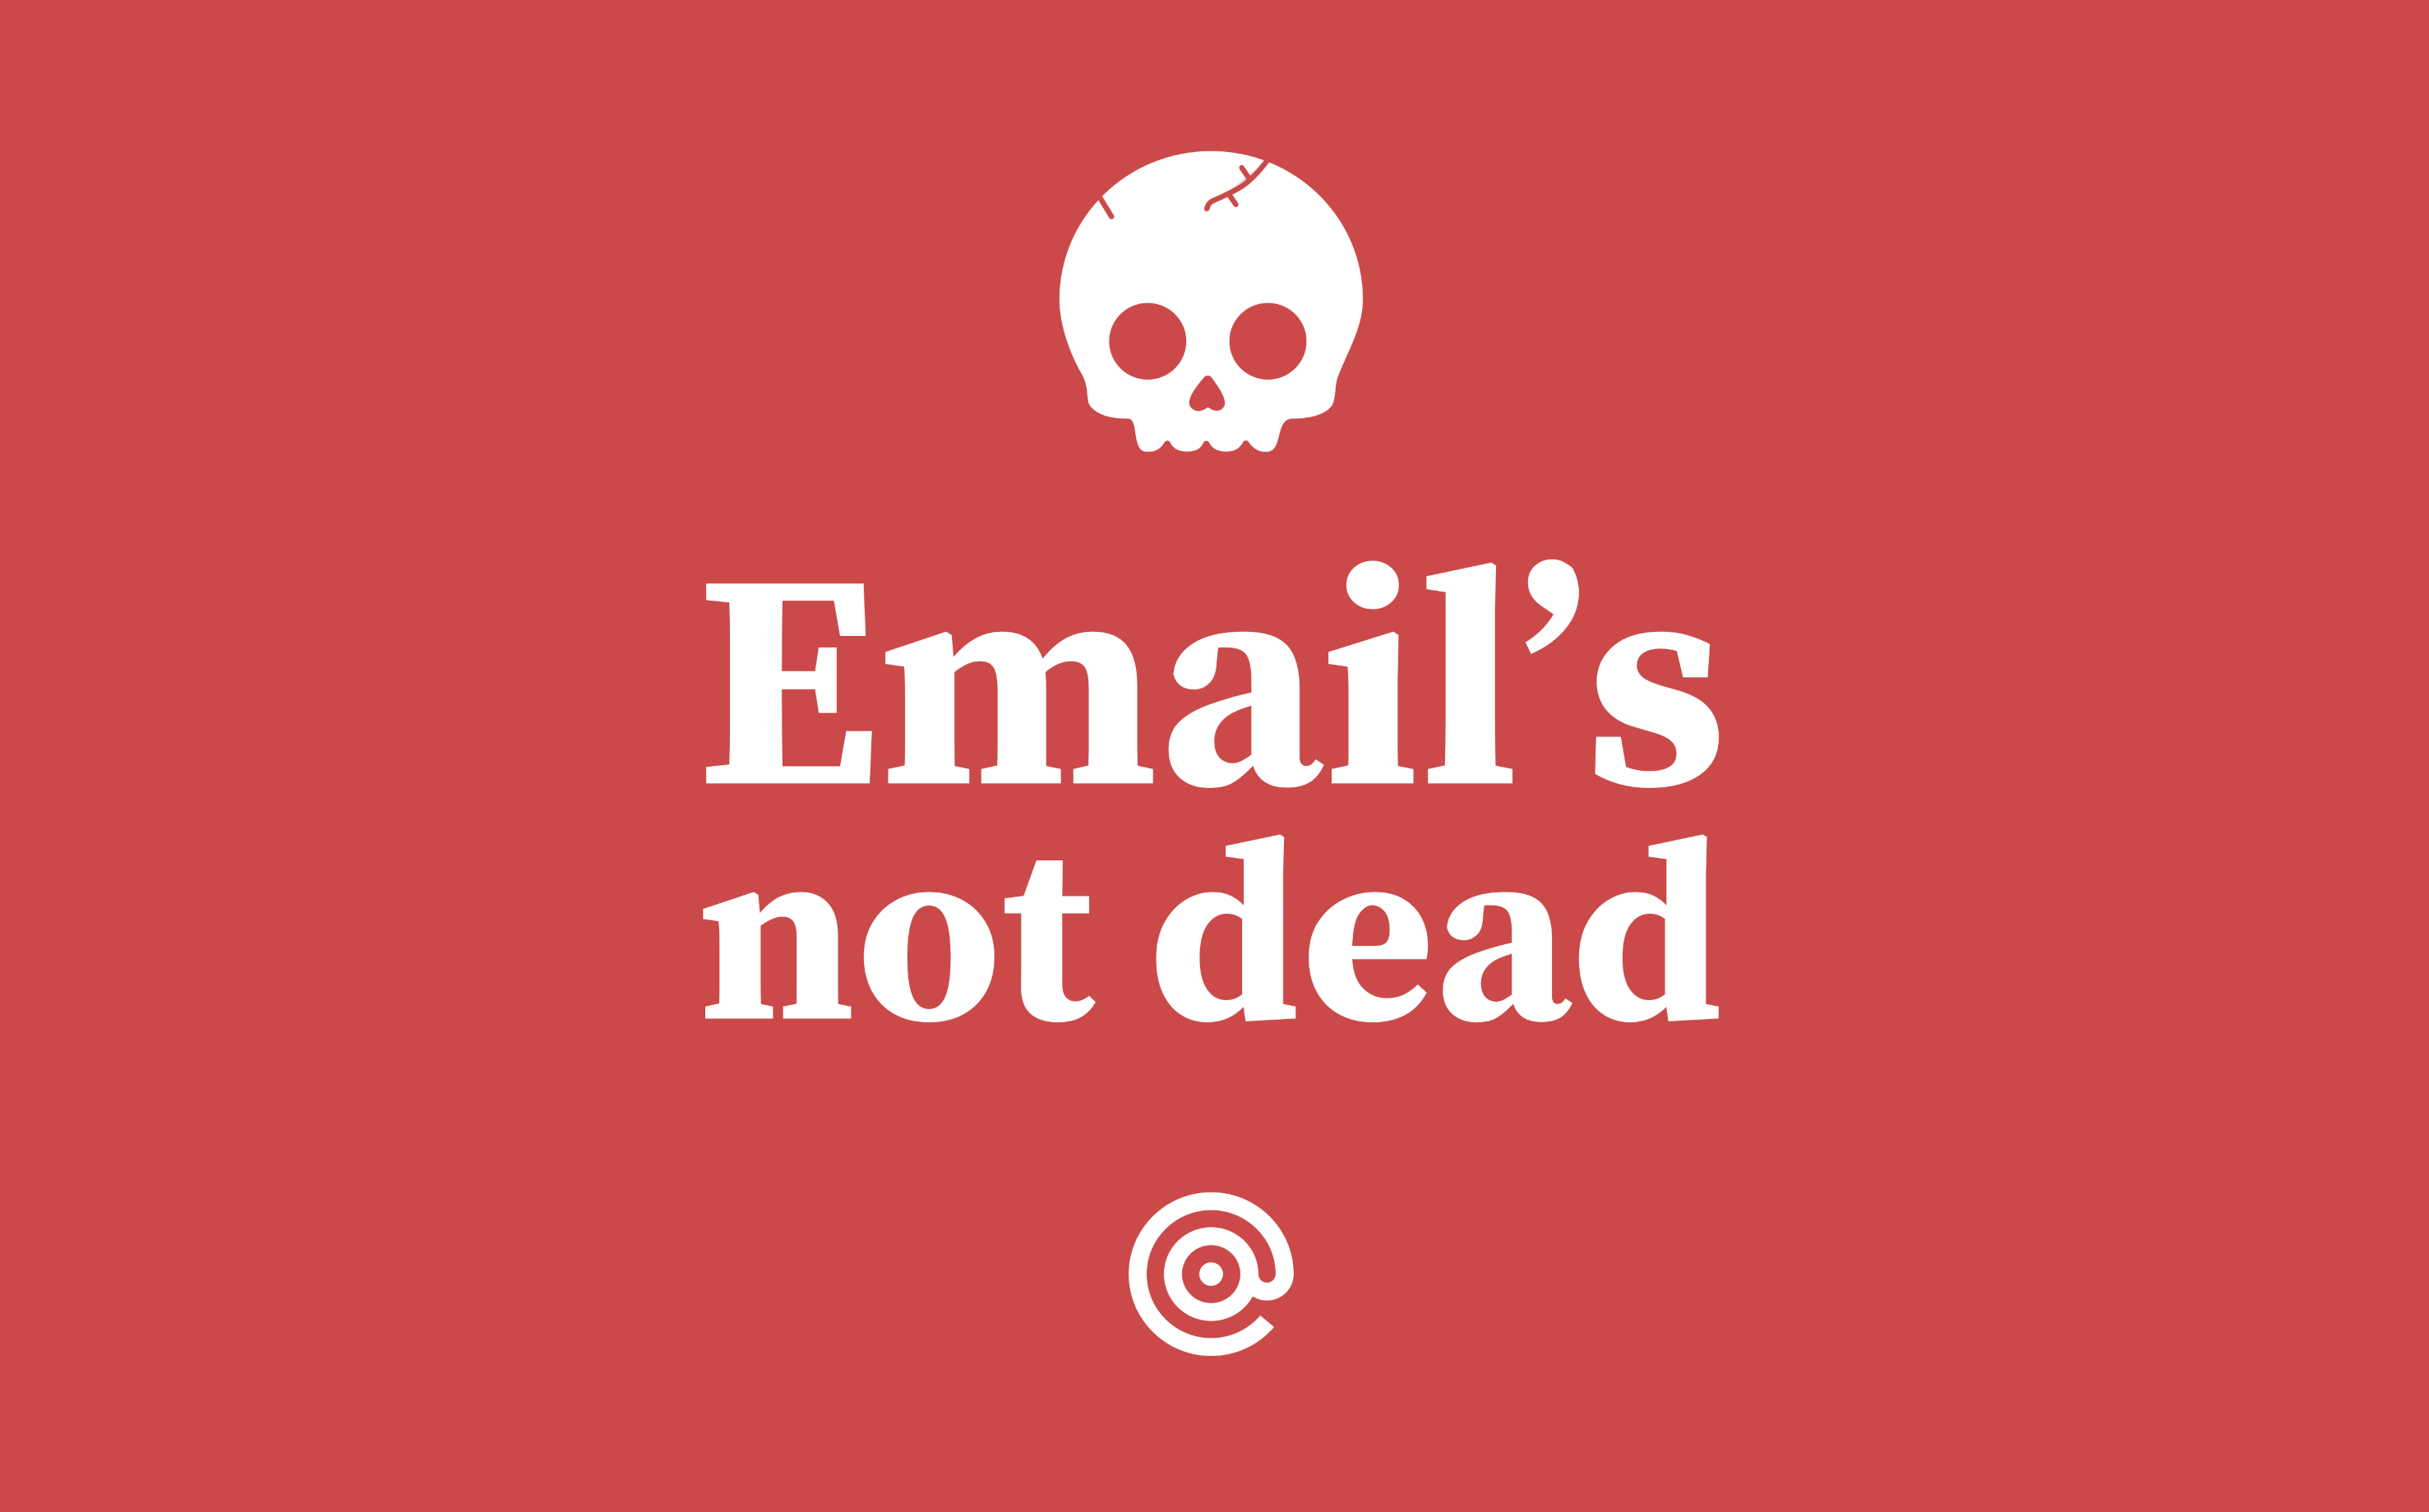 email's not dead